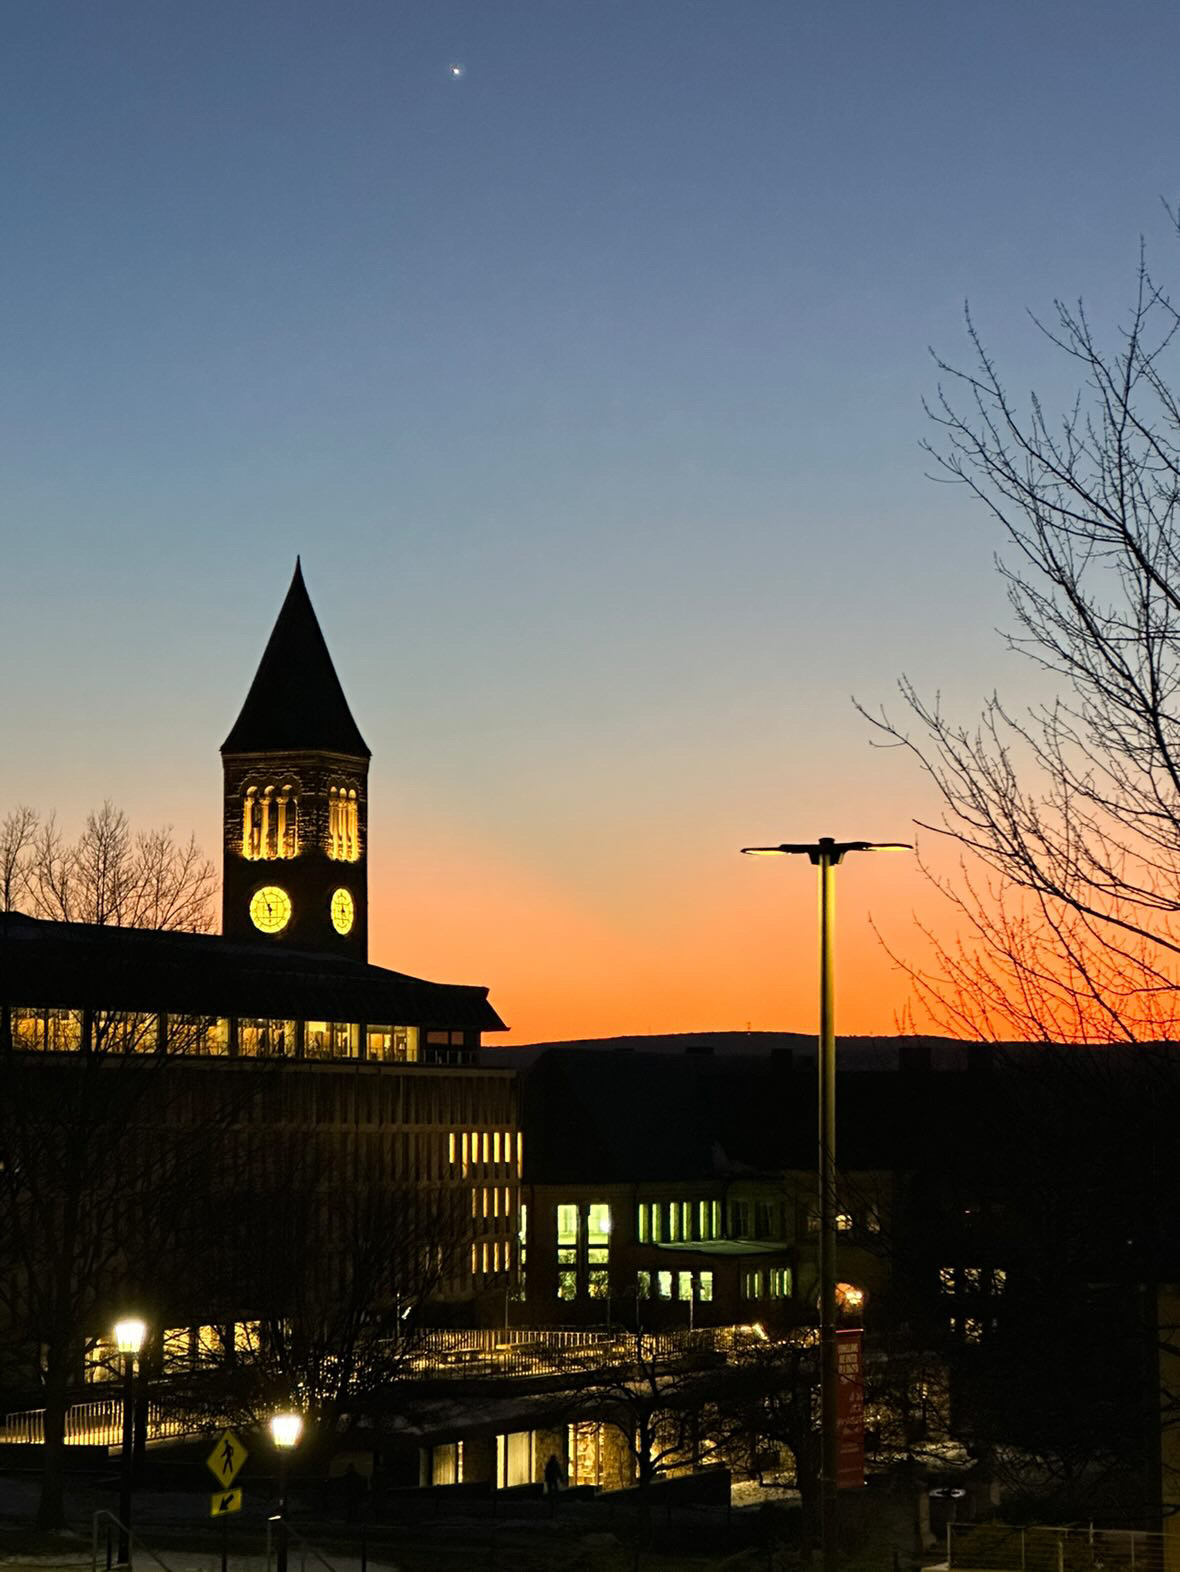 McGraw Tower at Cornell University lit up at night with an orange sunset on the horizon.